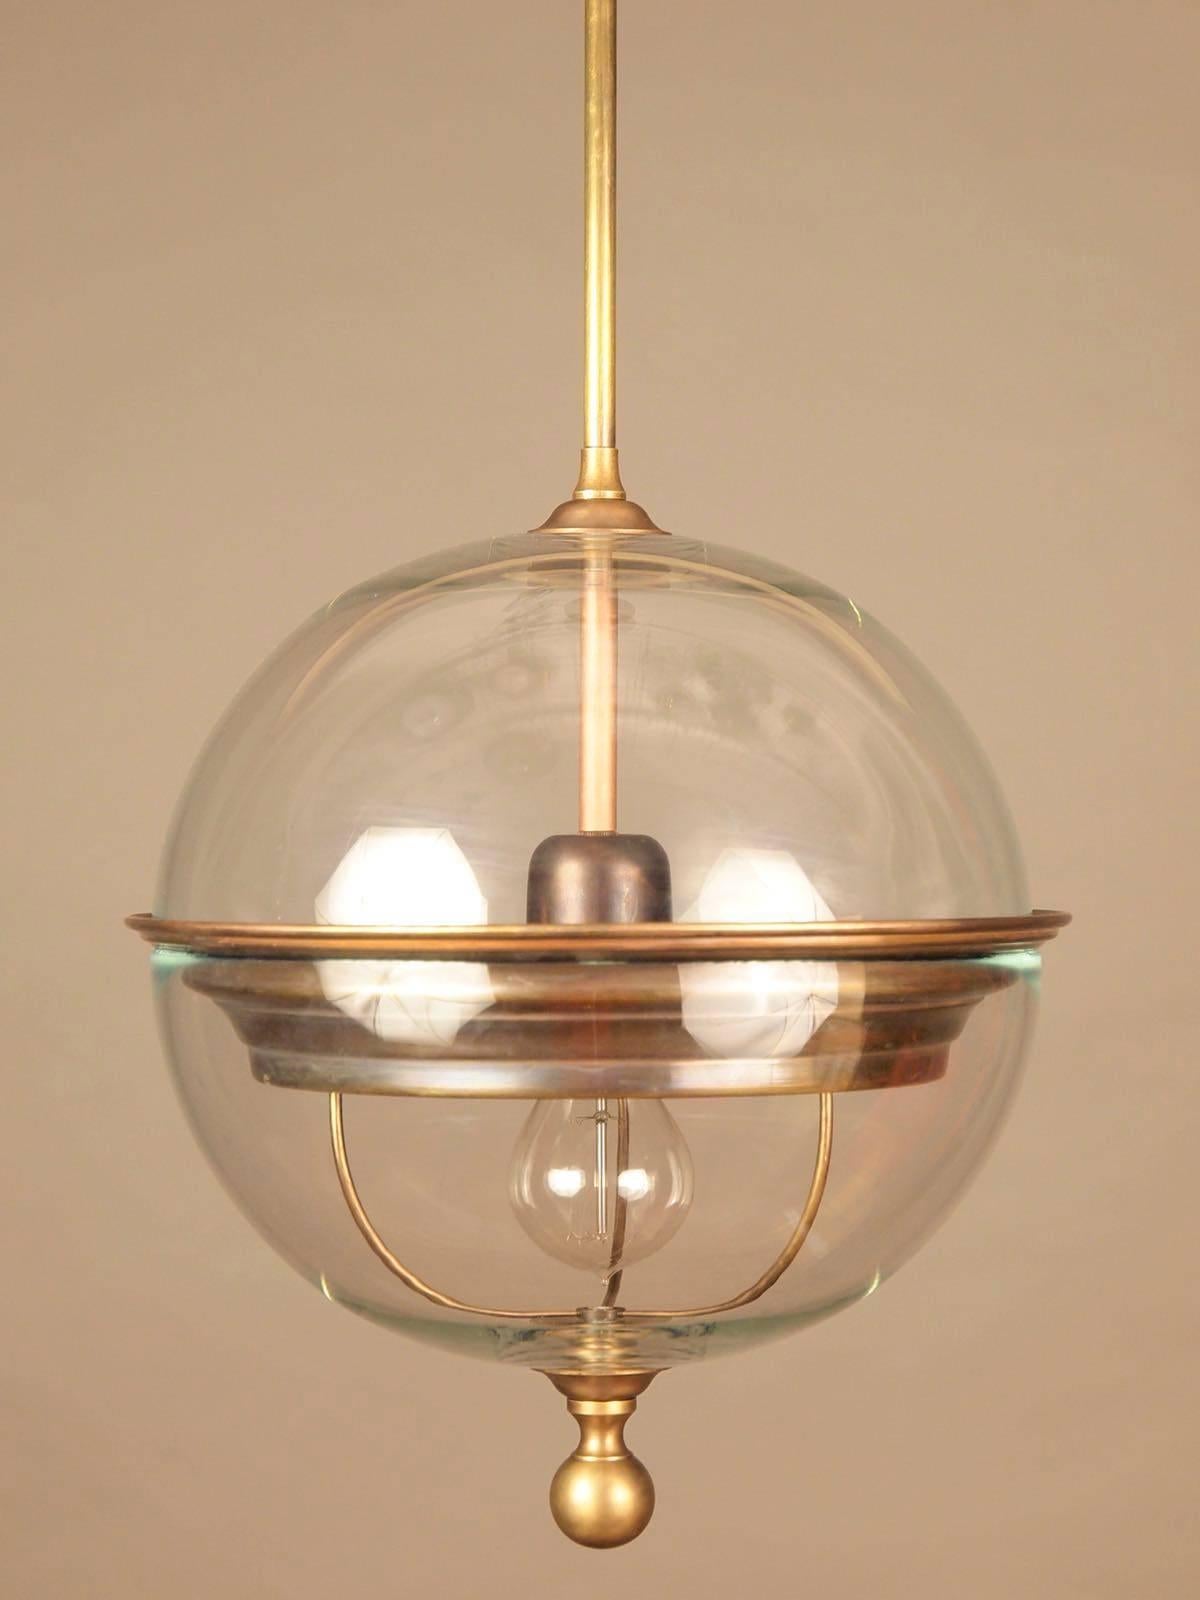 Pair of contemporary Italian glass globe shaped pendants with bronze details.
The globe has a brass finial bottom.
Measures: Globe light fixture height is 13.5